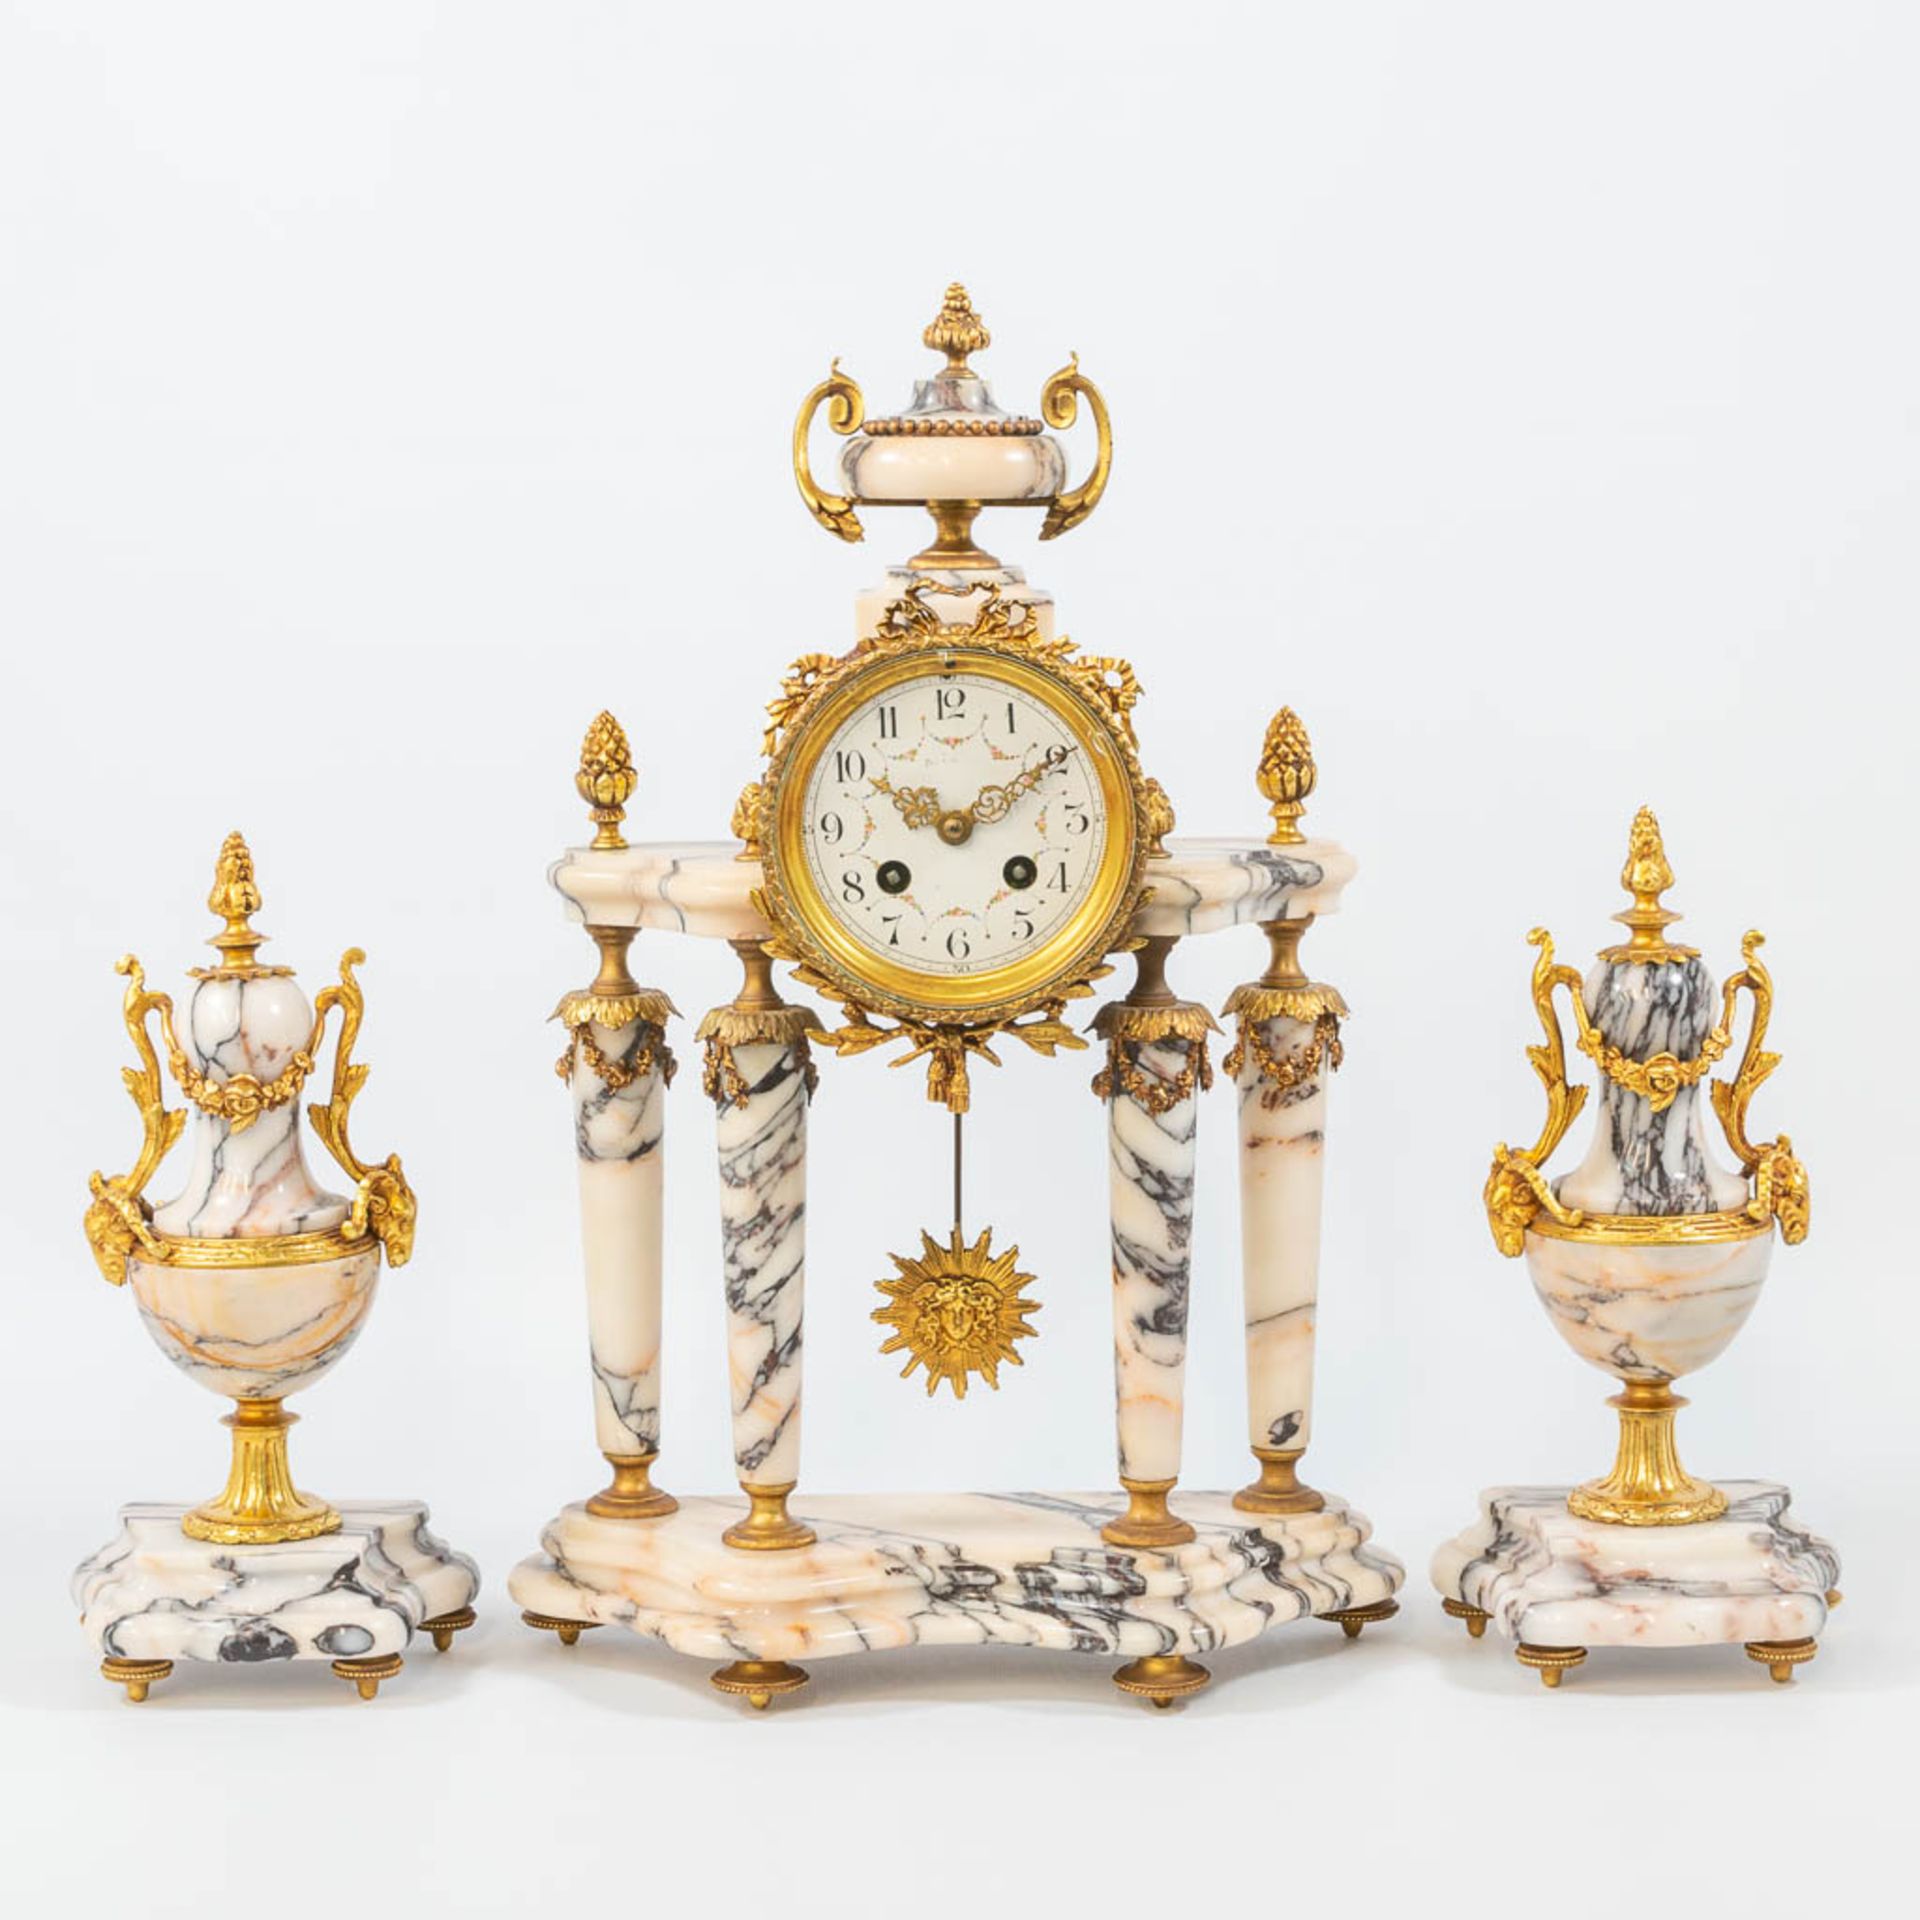 A louis XVI style 3-piece garniture clock with bronze mounted marble column clock, and 2 side pieces